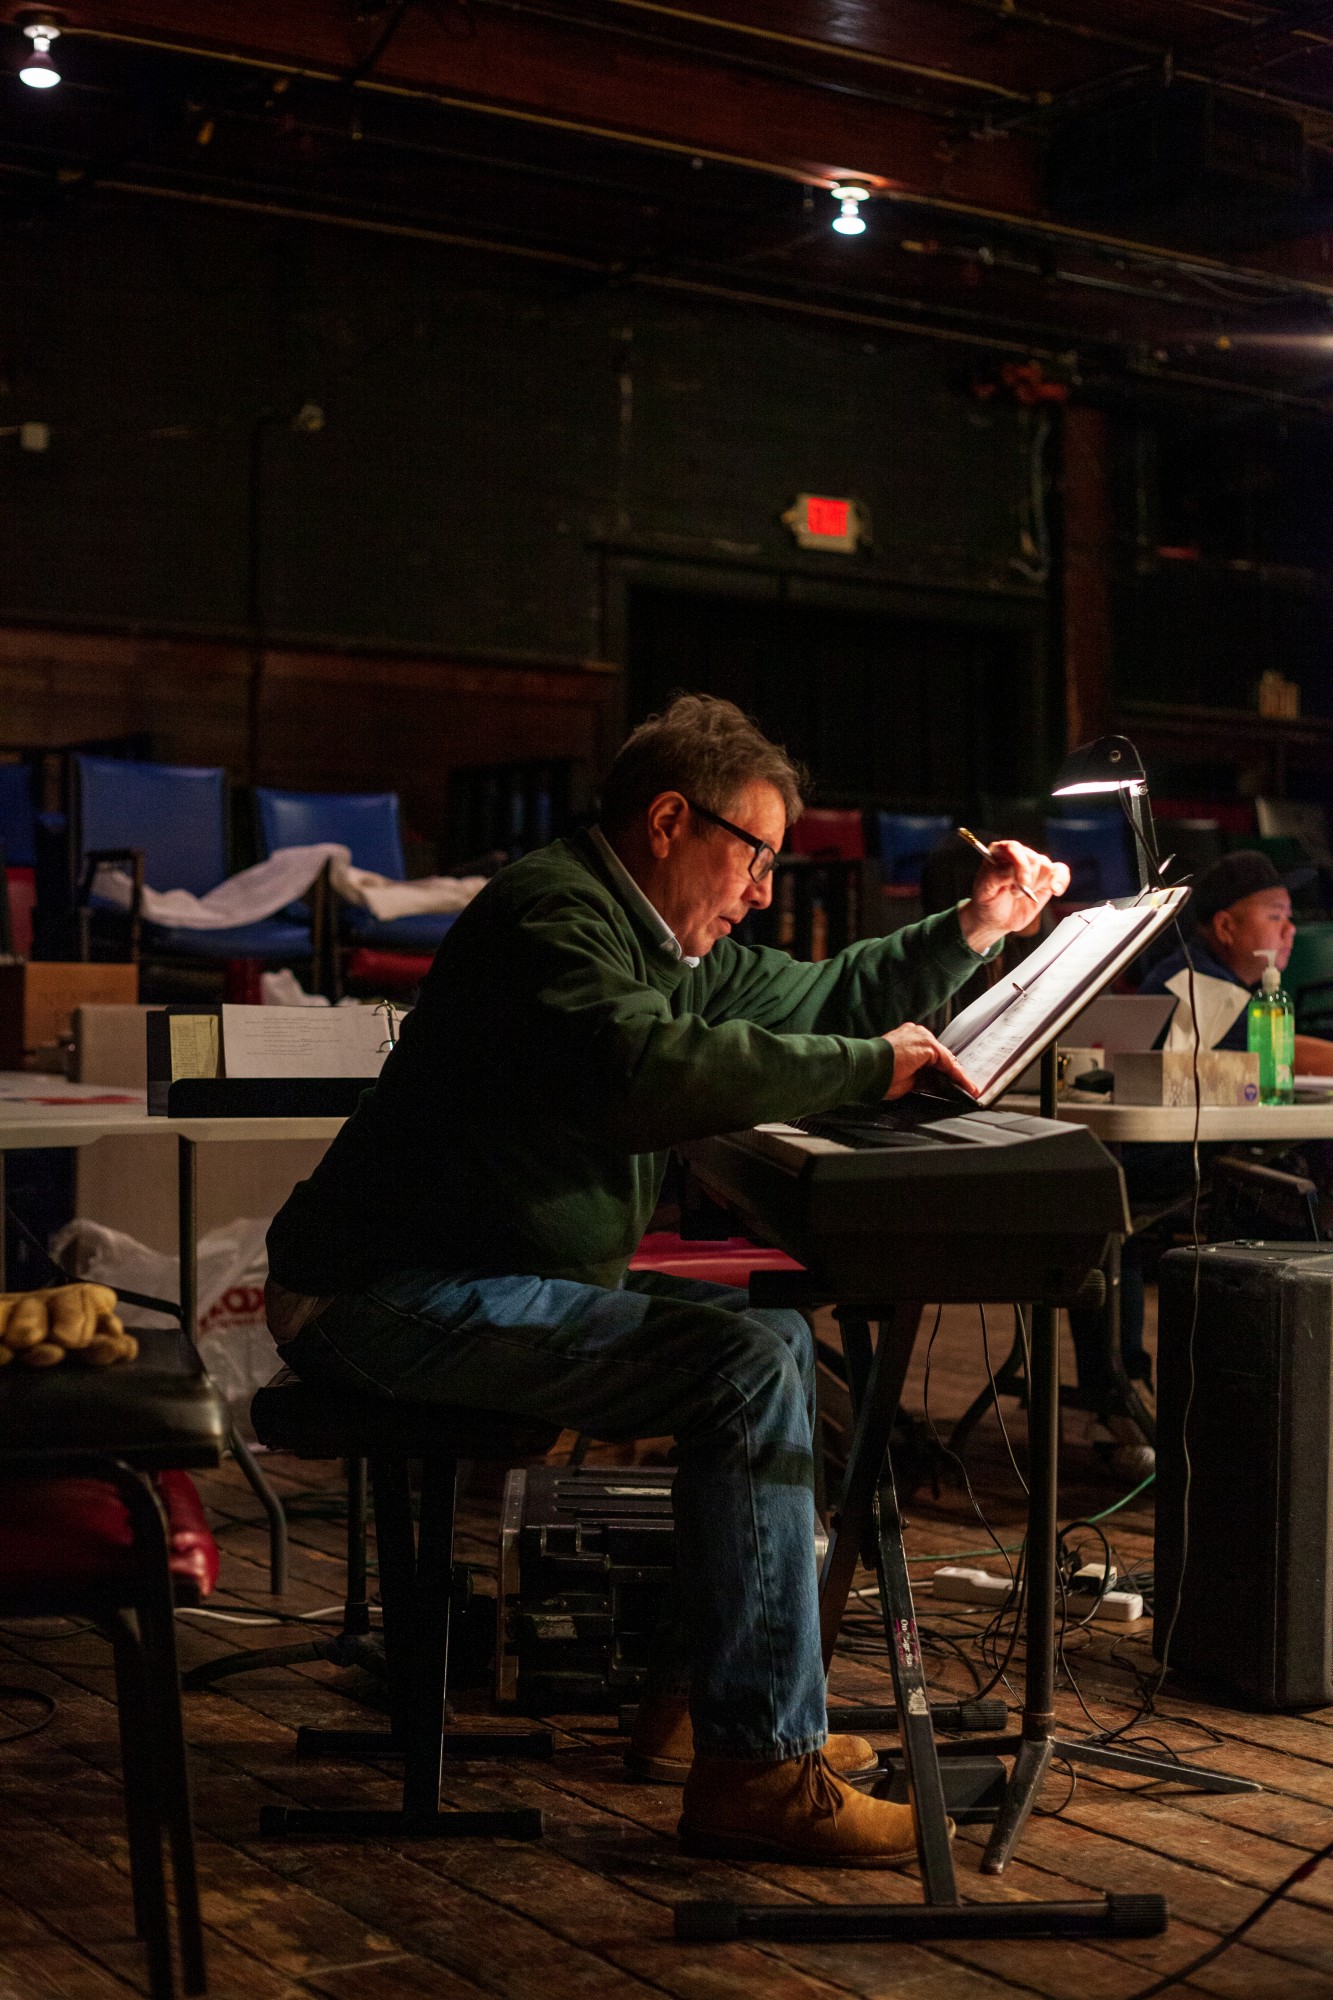 Musician Raymond Berg annotates changes on his sheet music during a rehearsal for Interstate at MixedBlood Theatre on Tuesday, Feb. 18. The production, created by Kit Yan and Melissa Li, follows the experiences of two trans people, navigating a myriad of cultural issues.